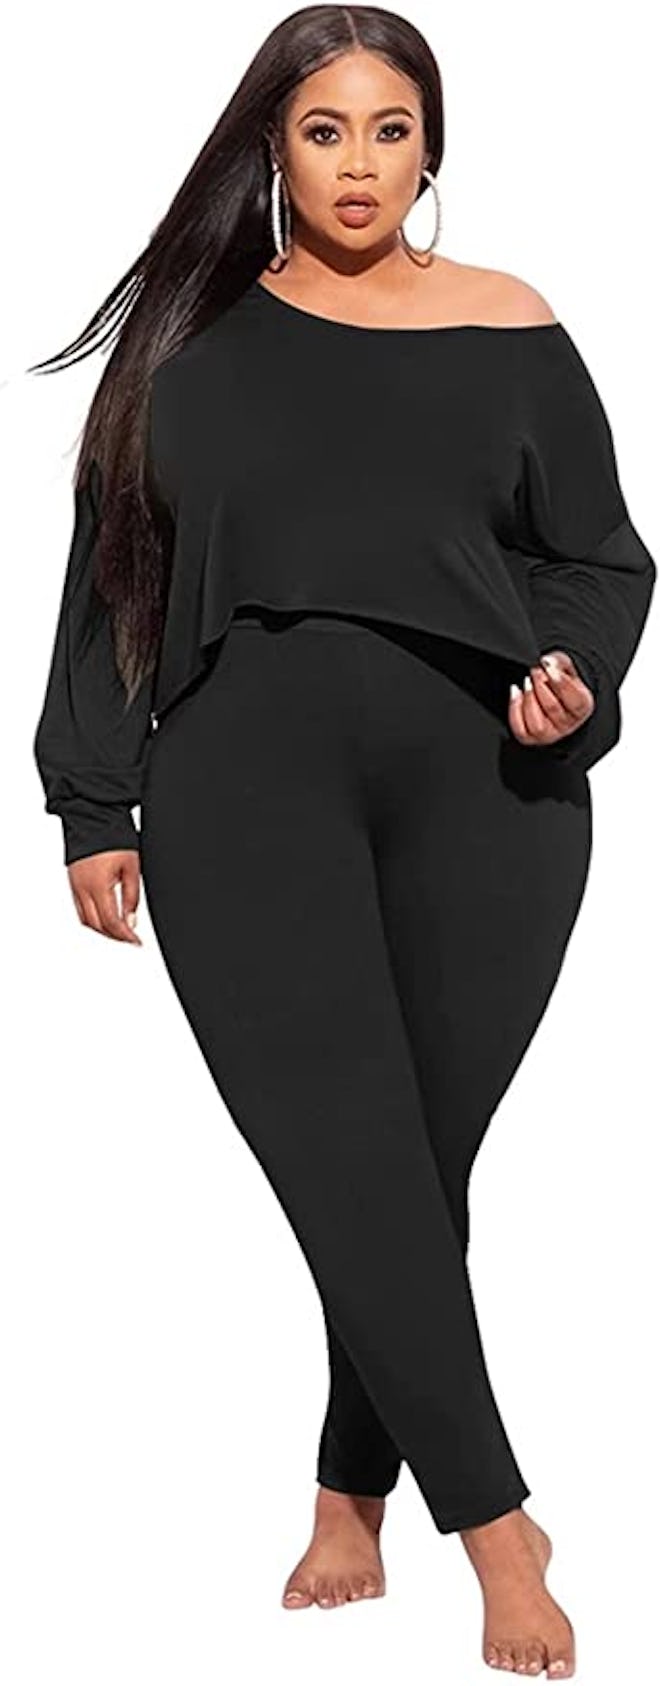 MRSYVES Plus Size 2 Piece Outfit